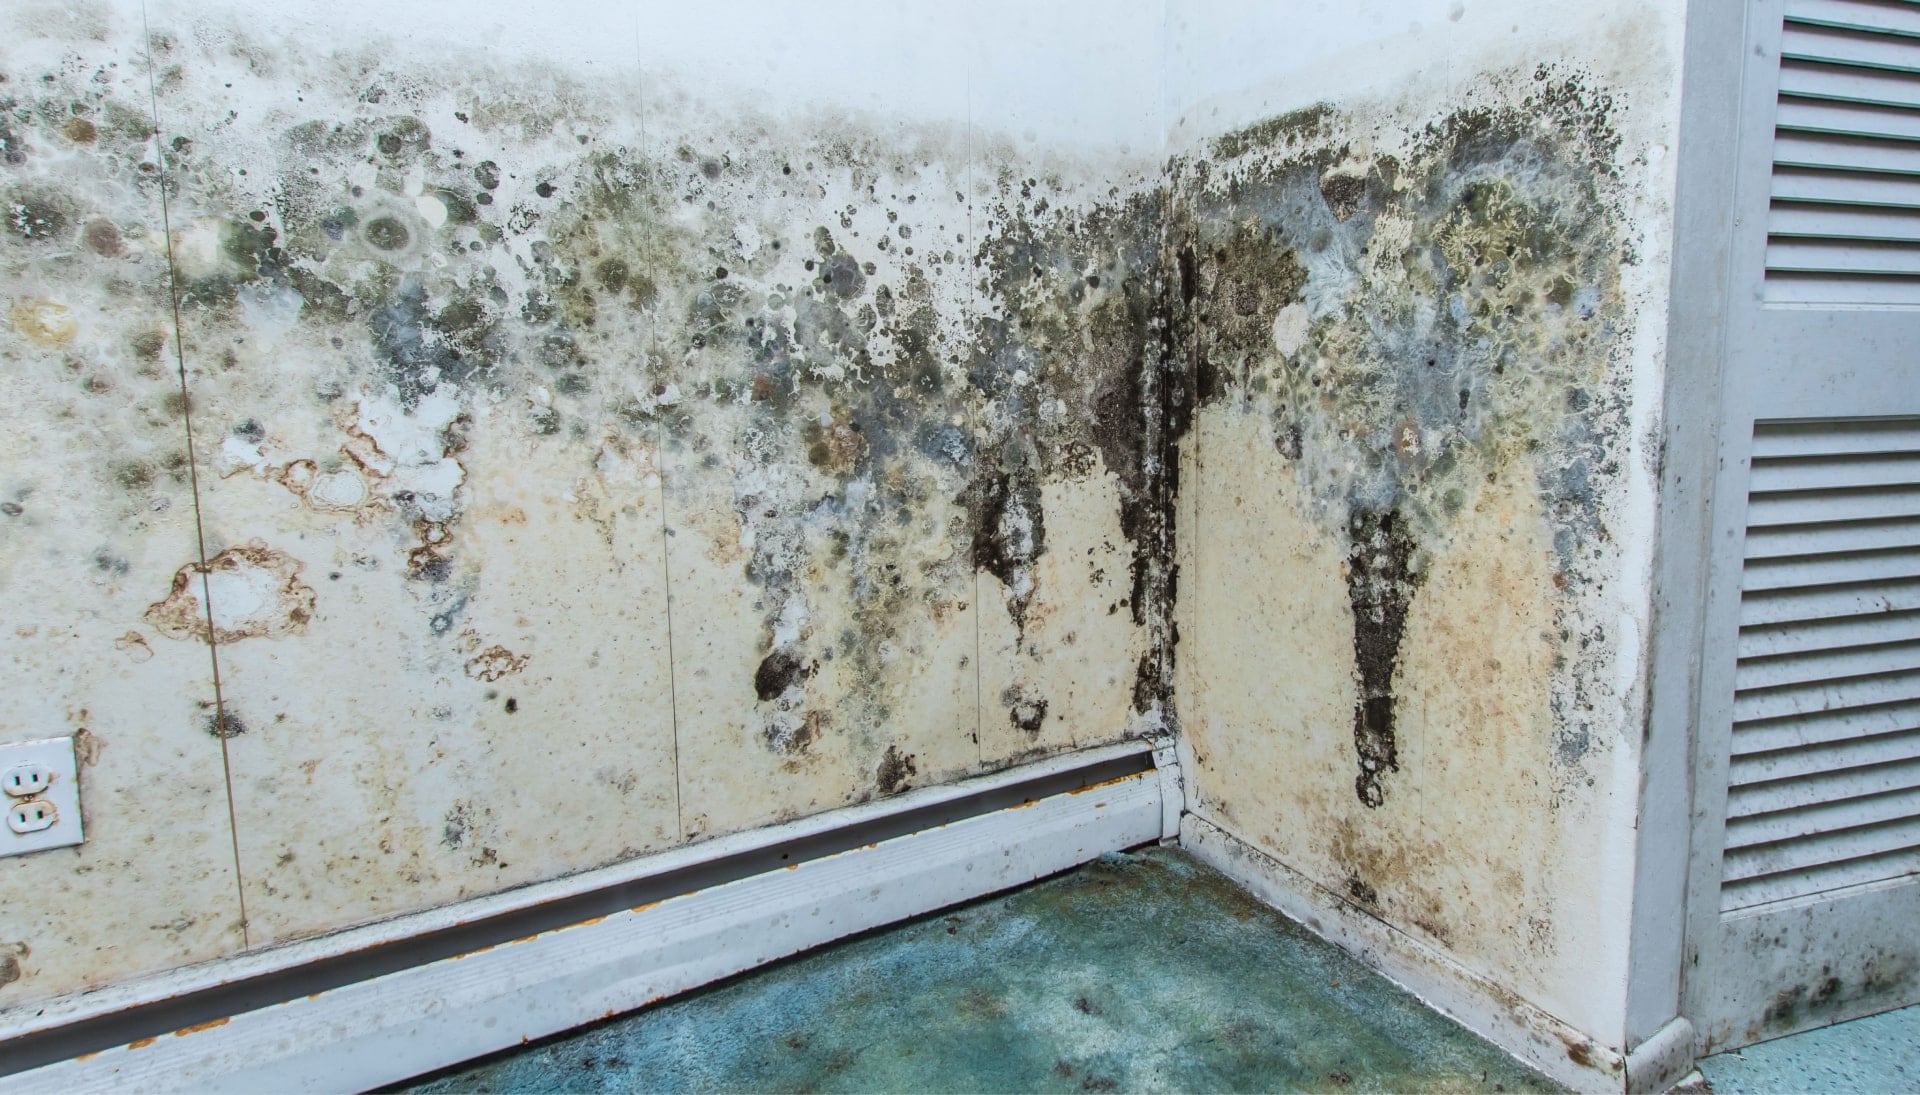 Professional mold removal, odor control, and water damage restoration service in Wichita, Kansas.